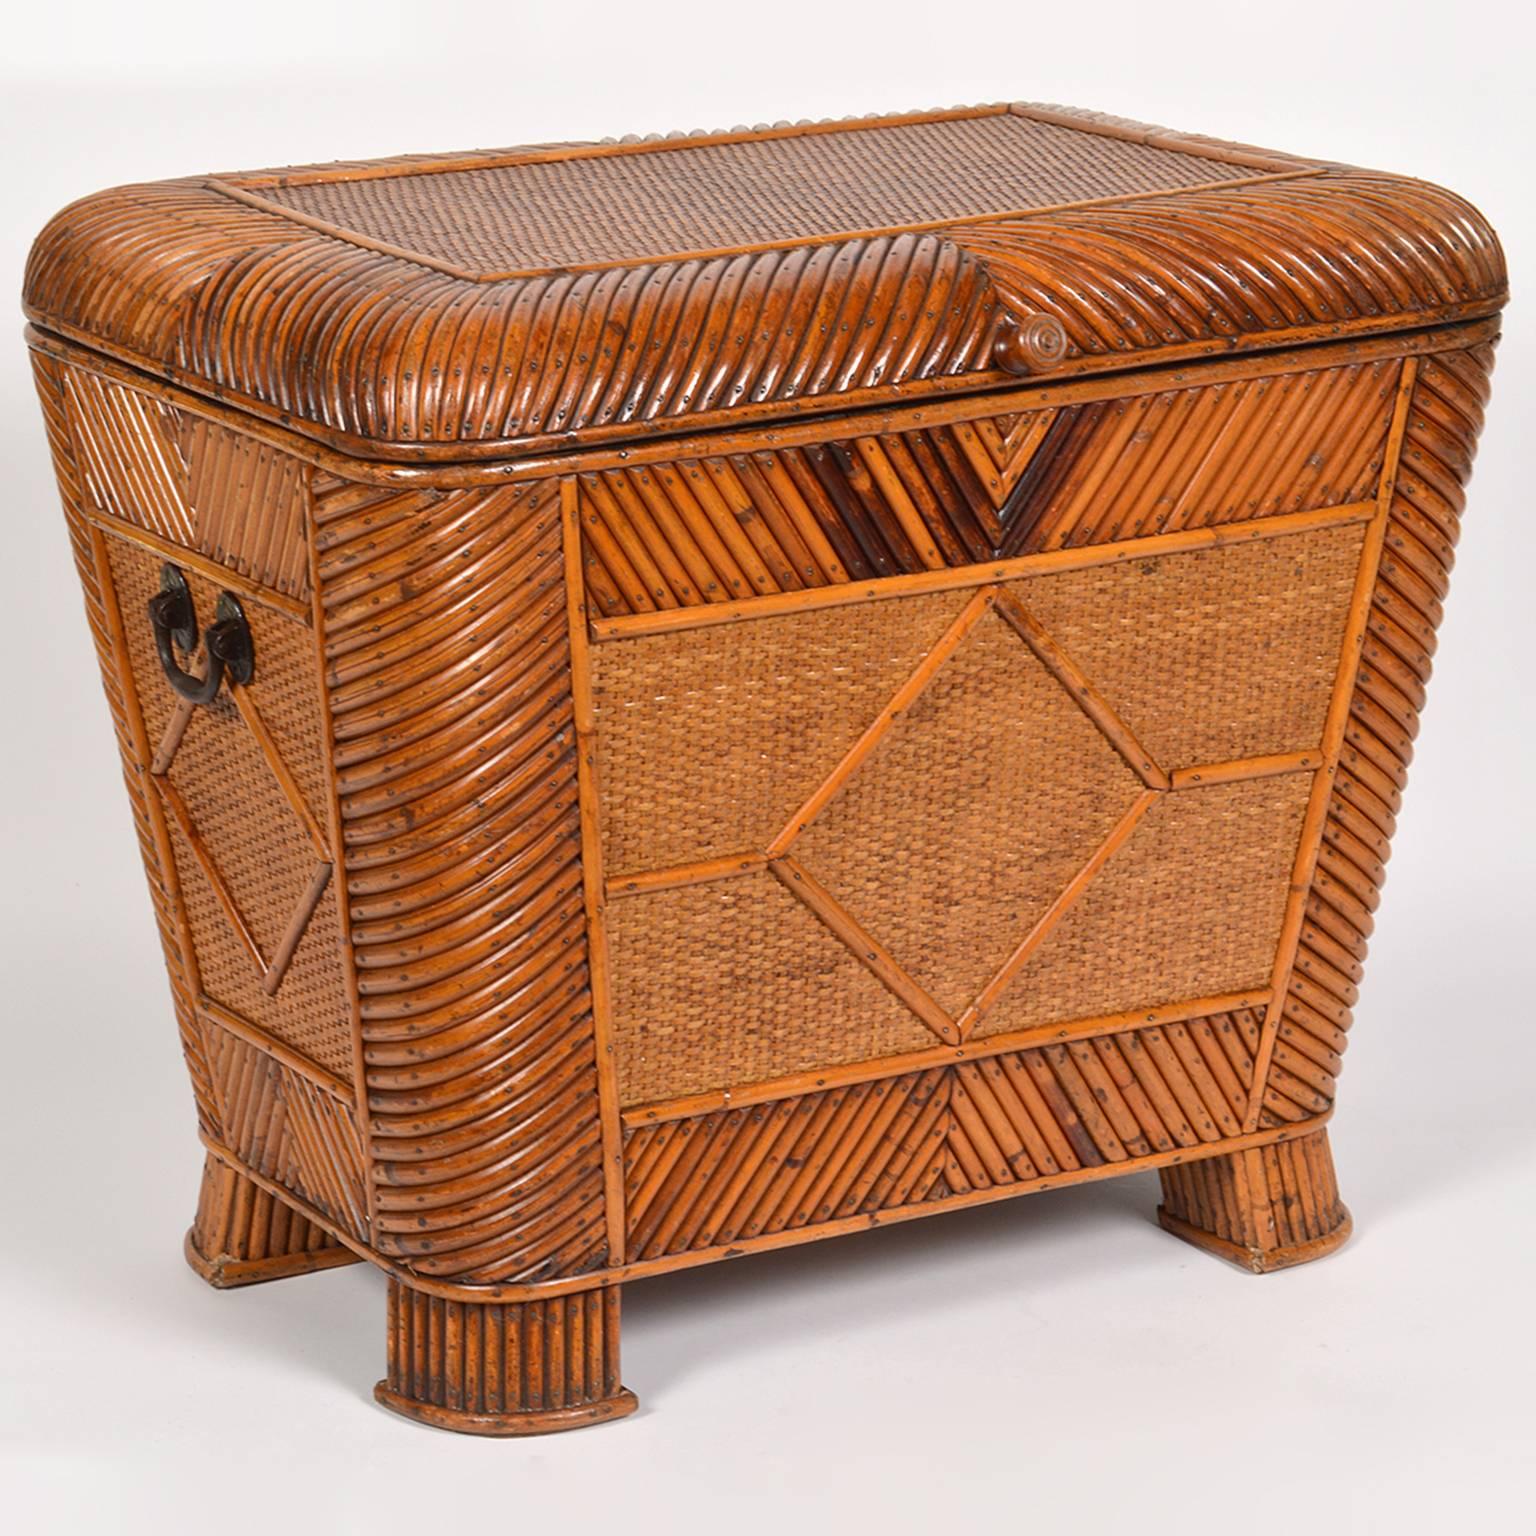 19th Century English Patterned Bamboo and Raffia Weave Covered Storage Box 3